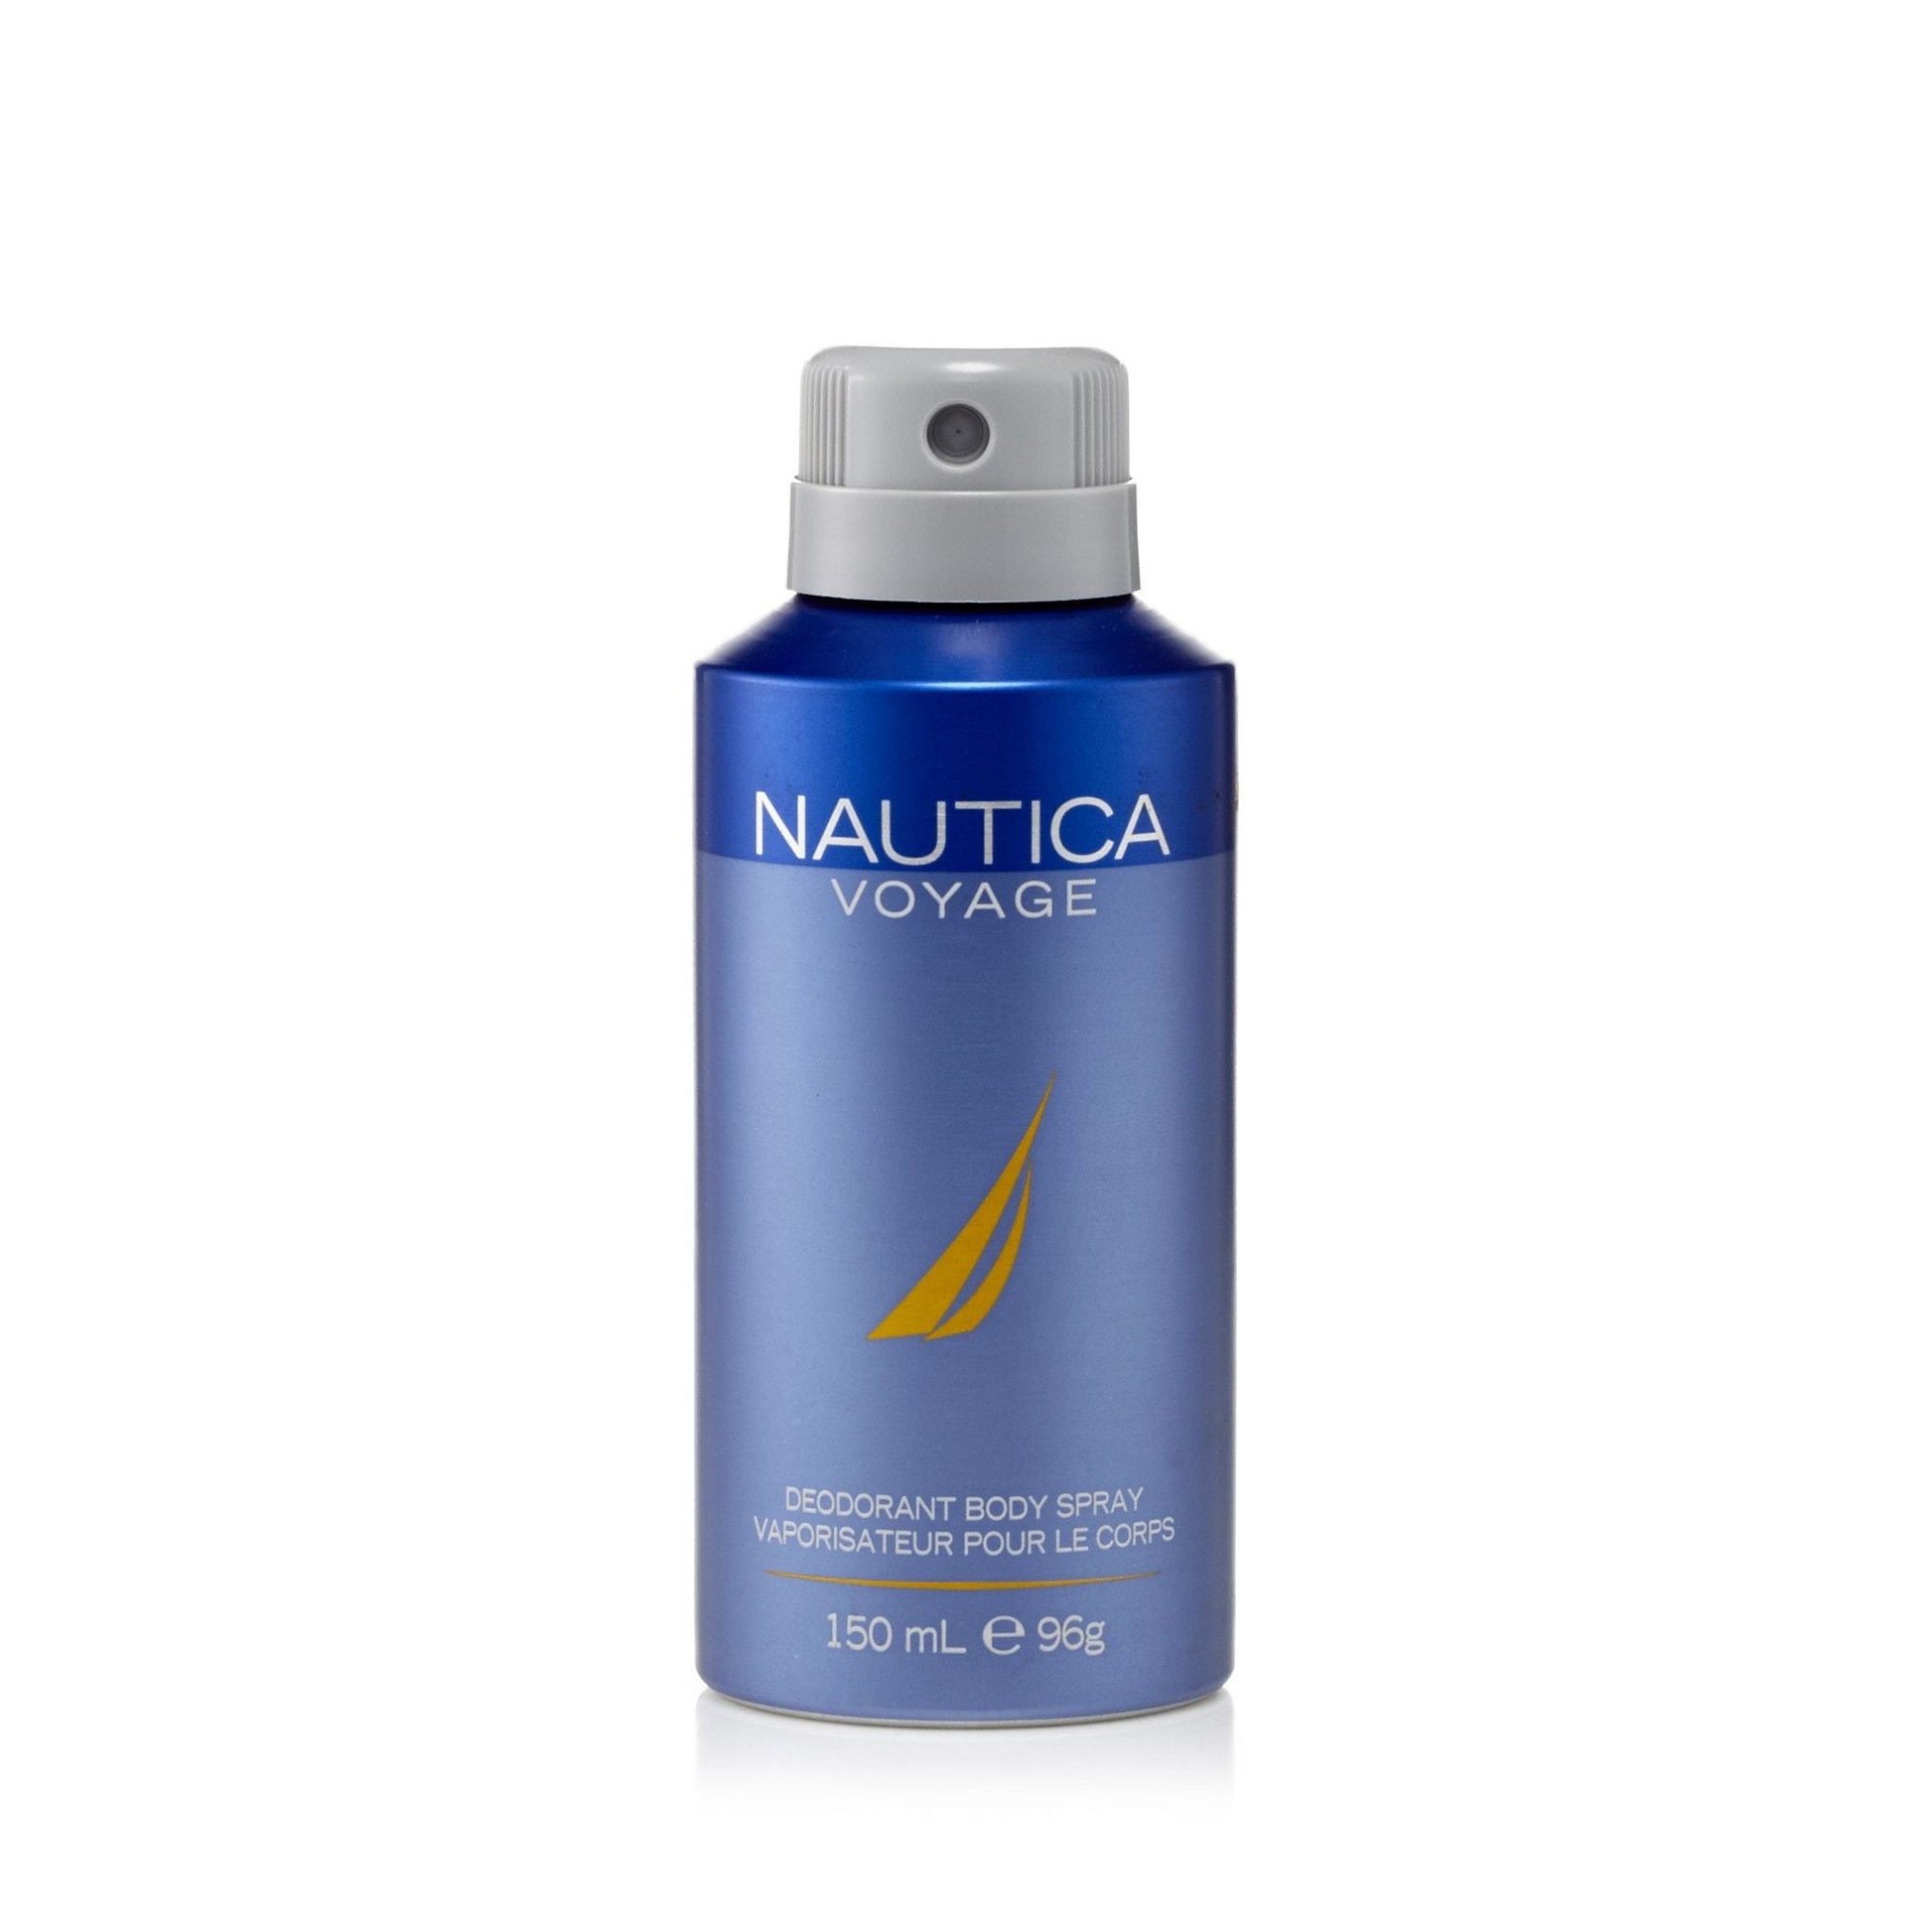 Voyage Deodorant Body Spray for Men by Nautica, Product image 1